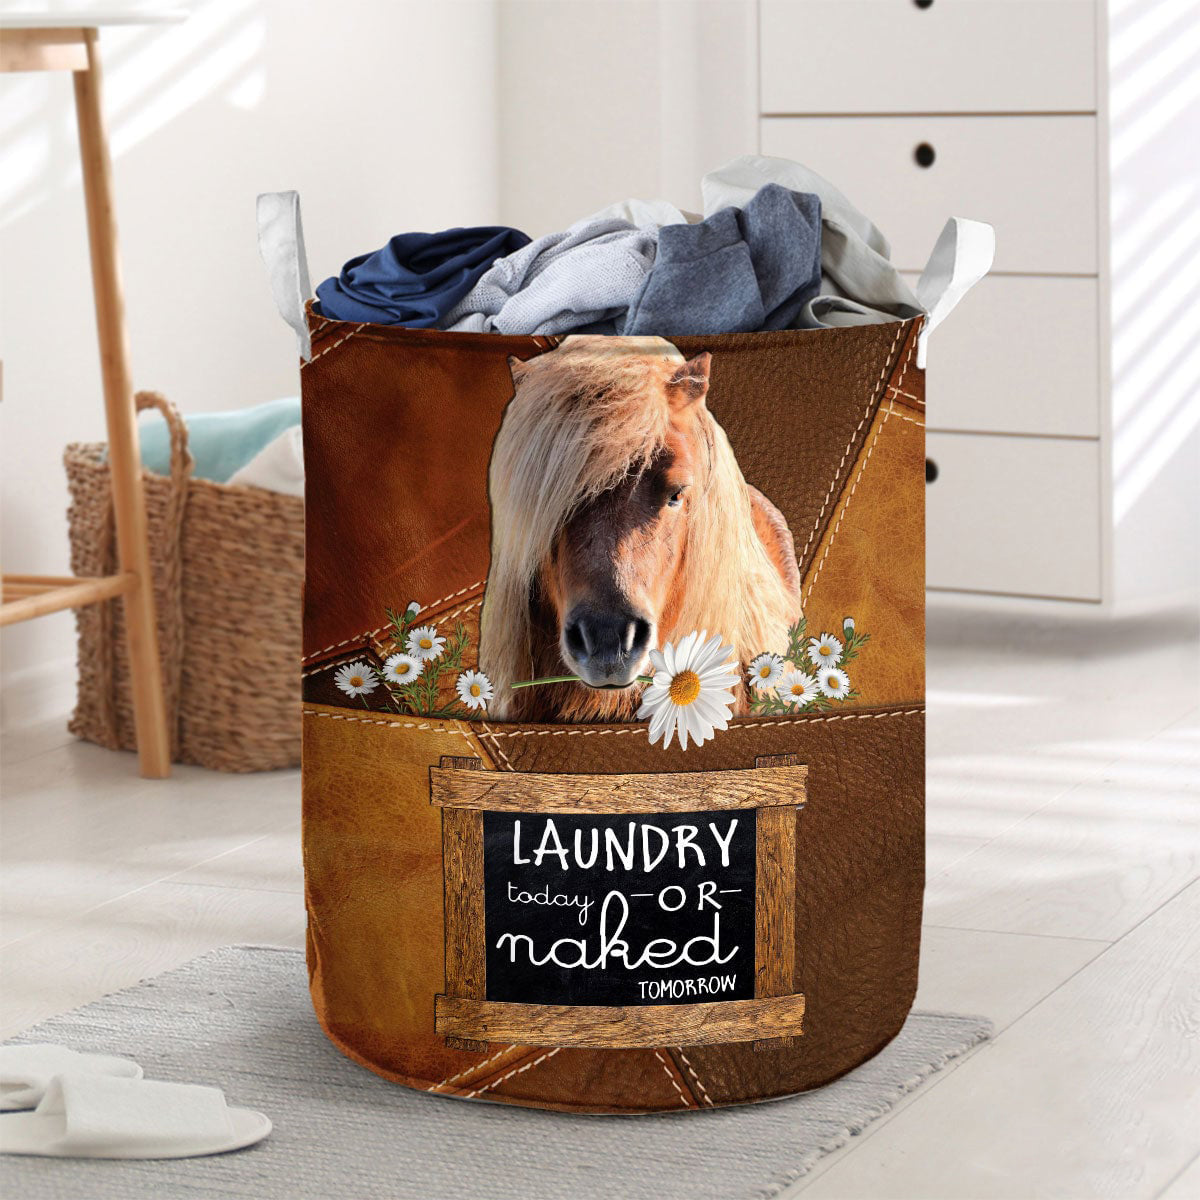 Ponies-laundry today or naked tomorrow laundry basket